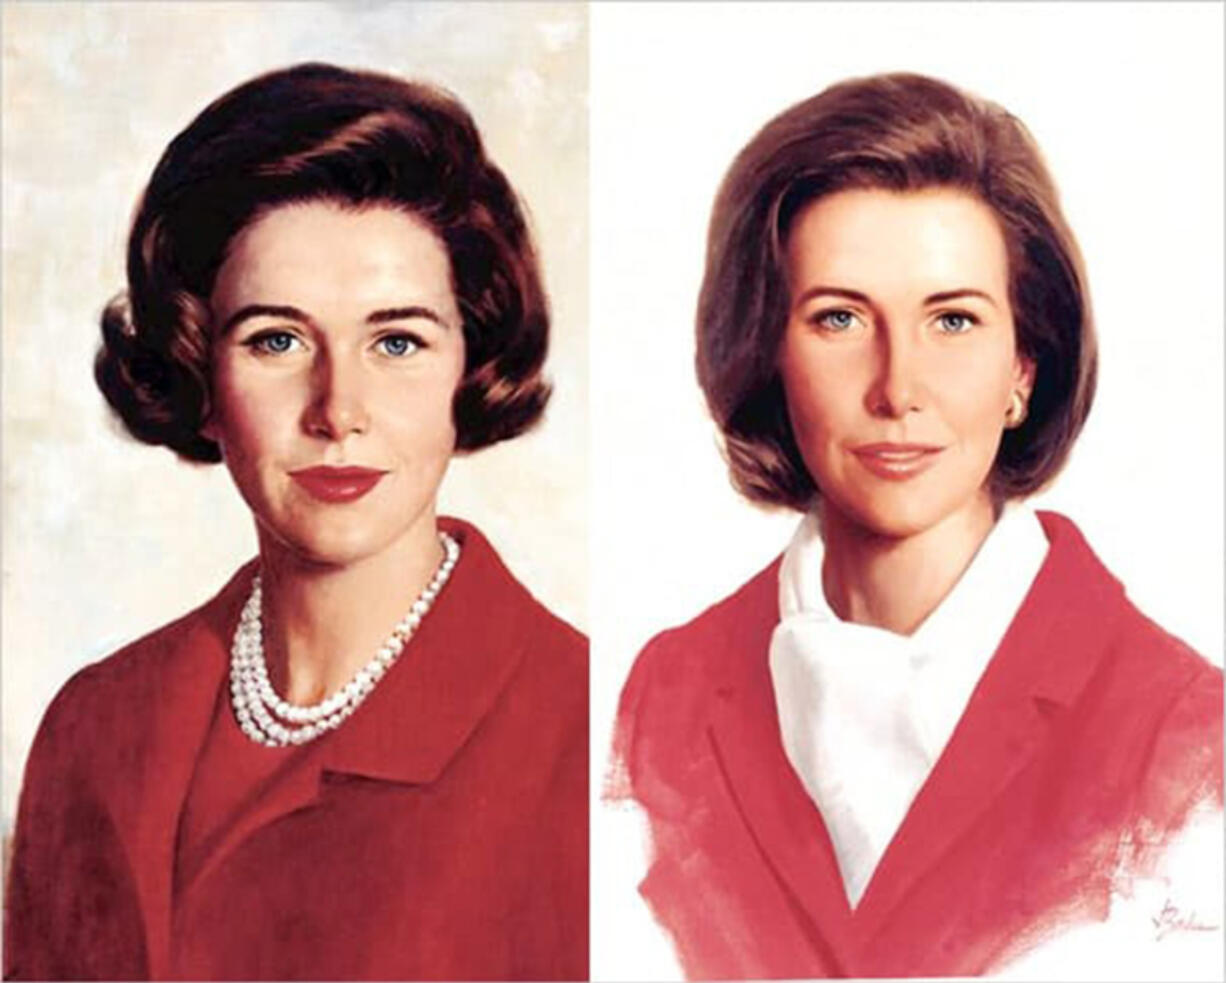 Betty Crocker's likeness has changed numerous times over the years.